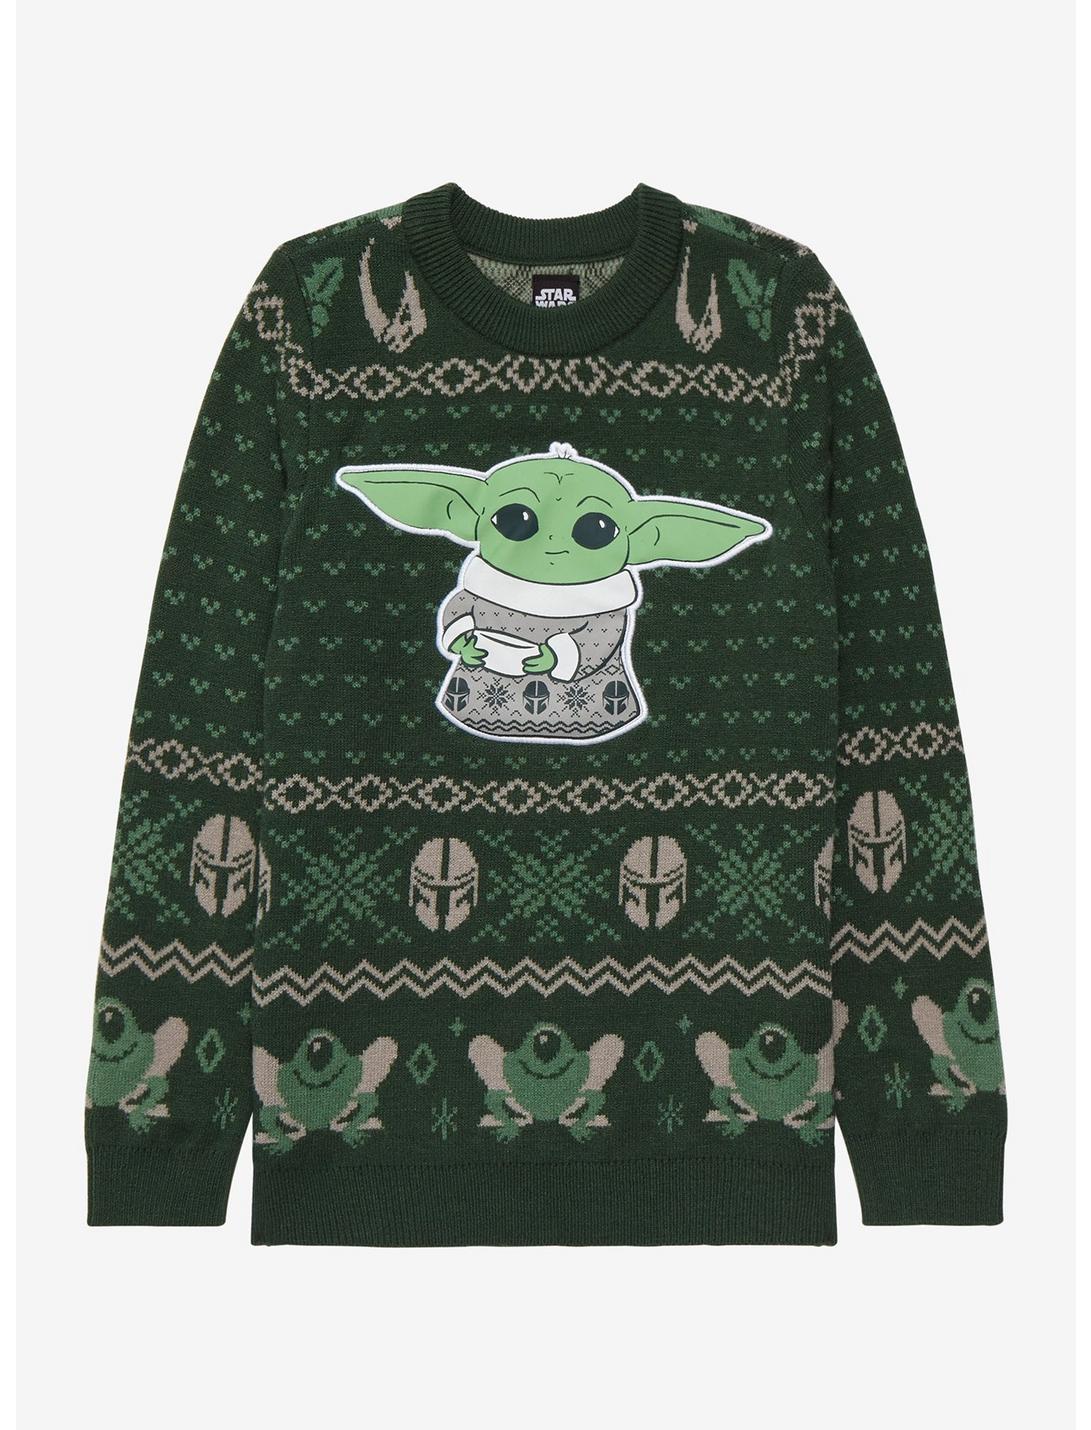 Star Wars The Mandalorian Grogu Toddler Holiday Sweater - BoxLunch Exclusive, FOREST, hi-res